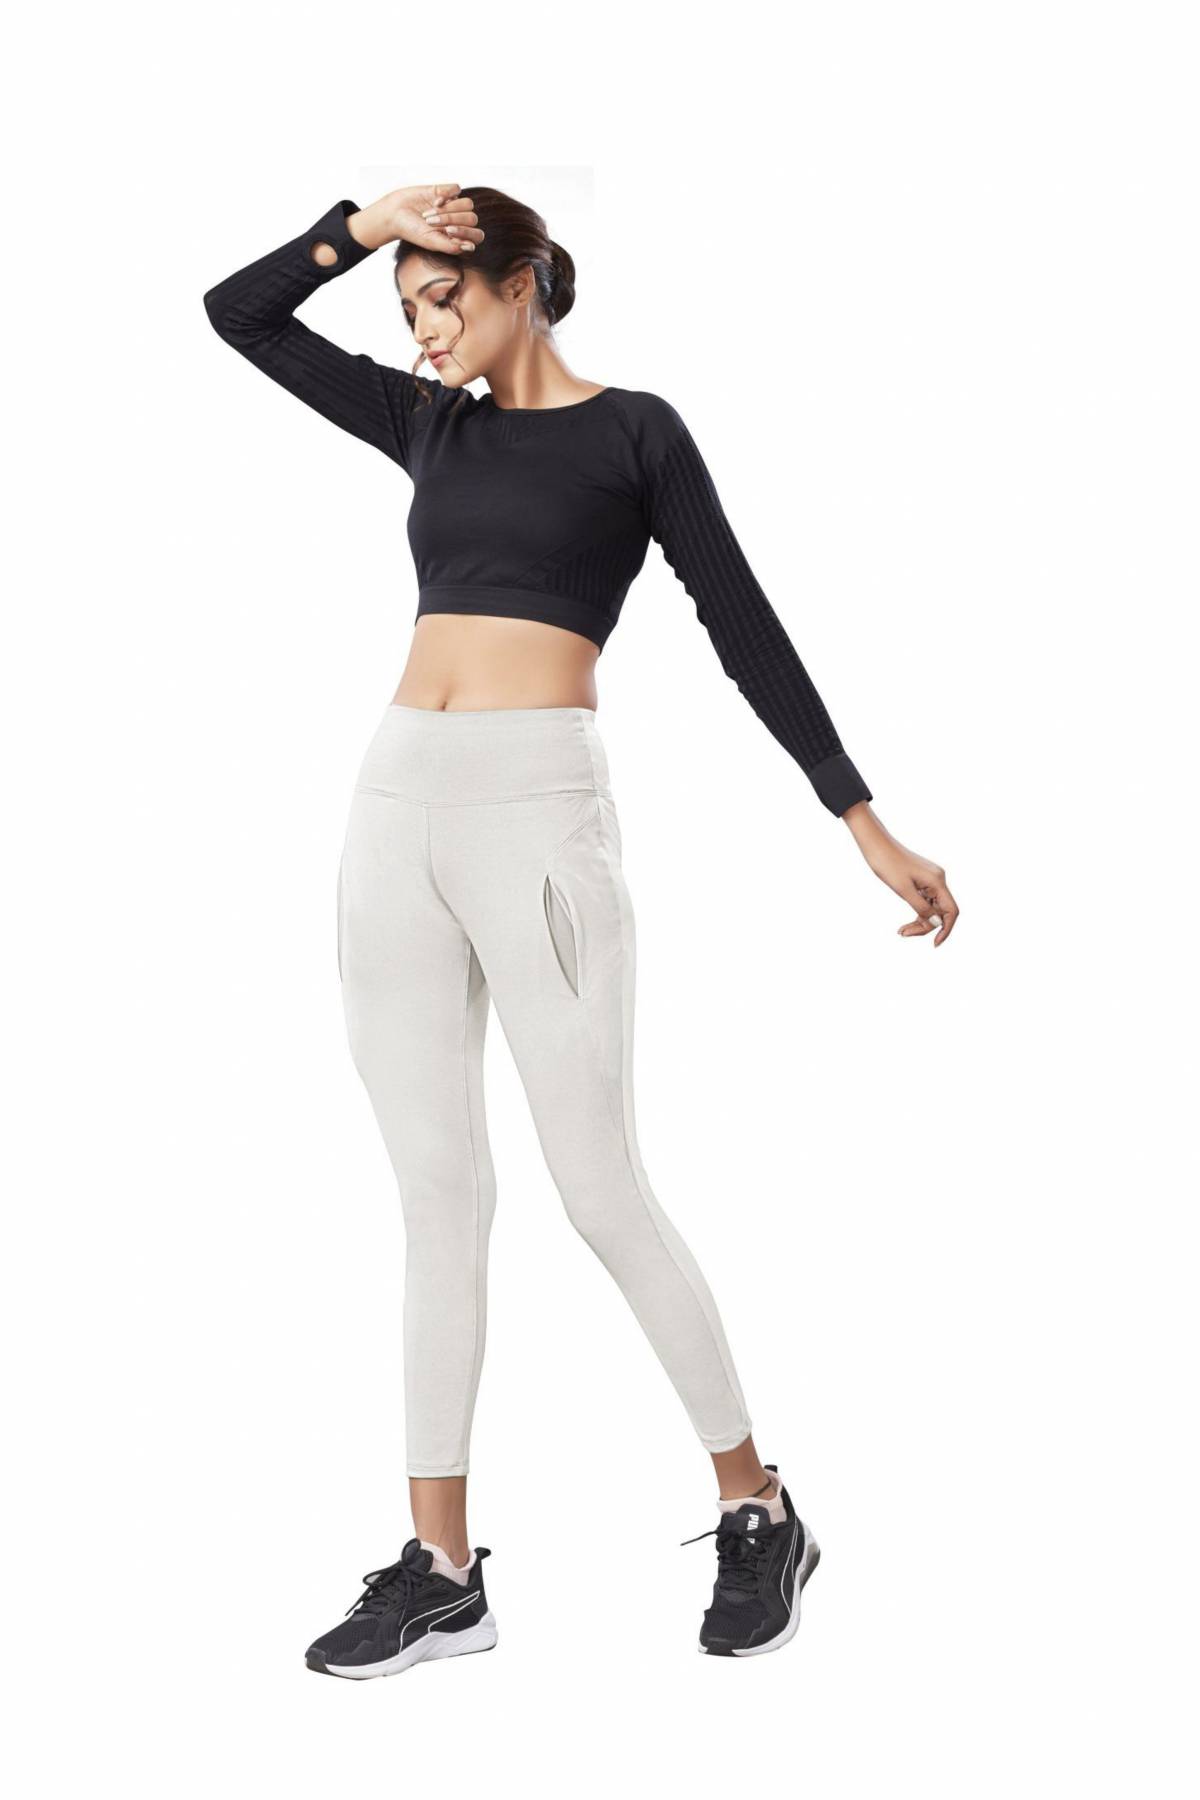 Kissero Women's Dry fit Track Pants Lower for Jogging Yoga Gym : Amazon.in:  Fashion